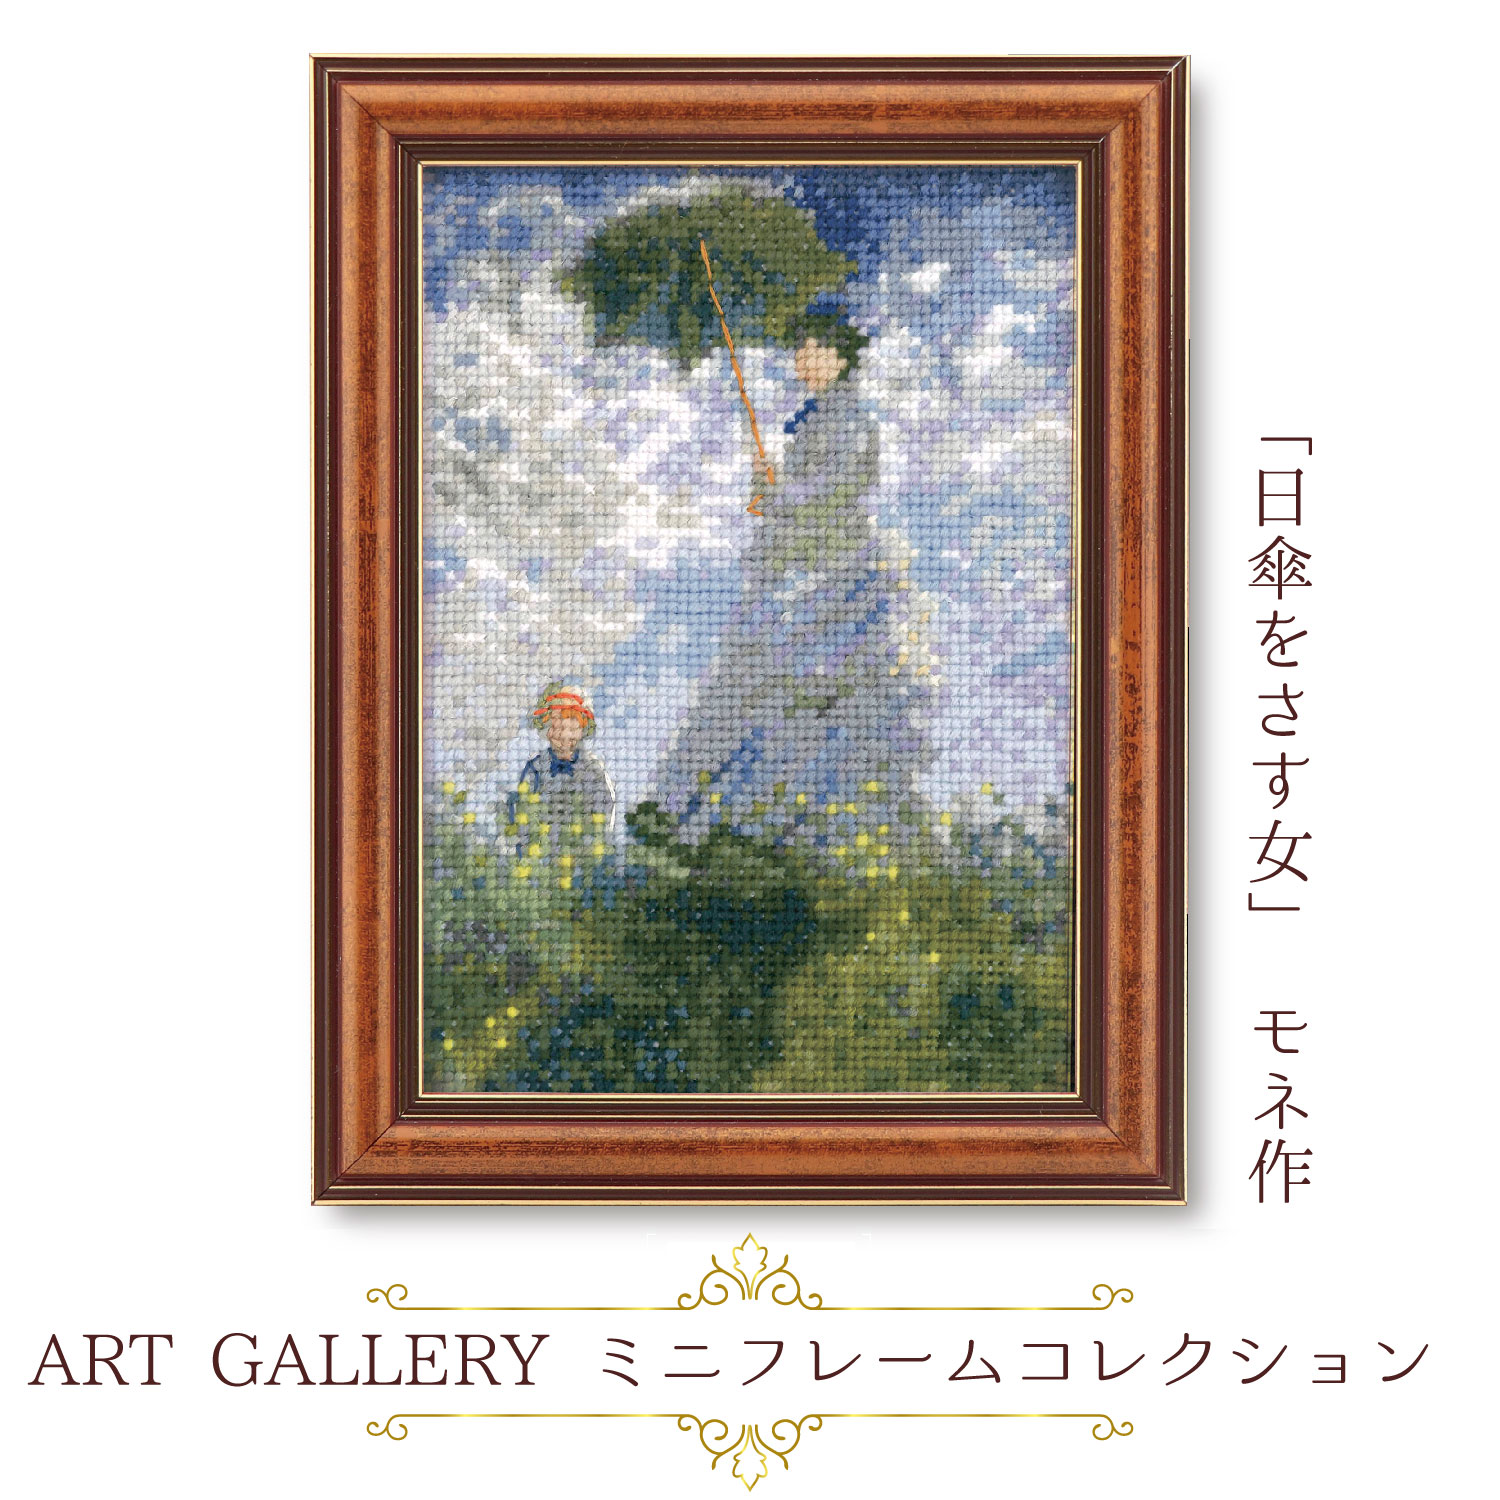 OLY-K7585 OLYMPUS Embroidery Kit ART GALLERY Mini Frame Collection "Woman with a Parasol" by Monet (pieces)